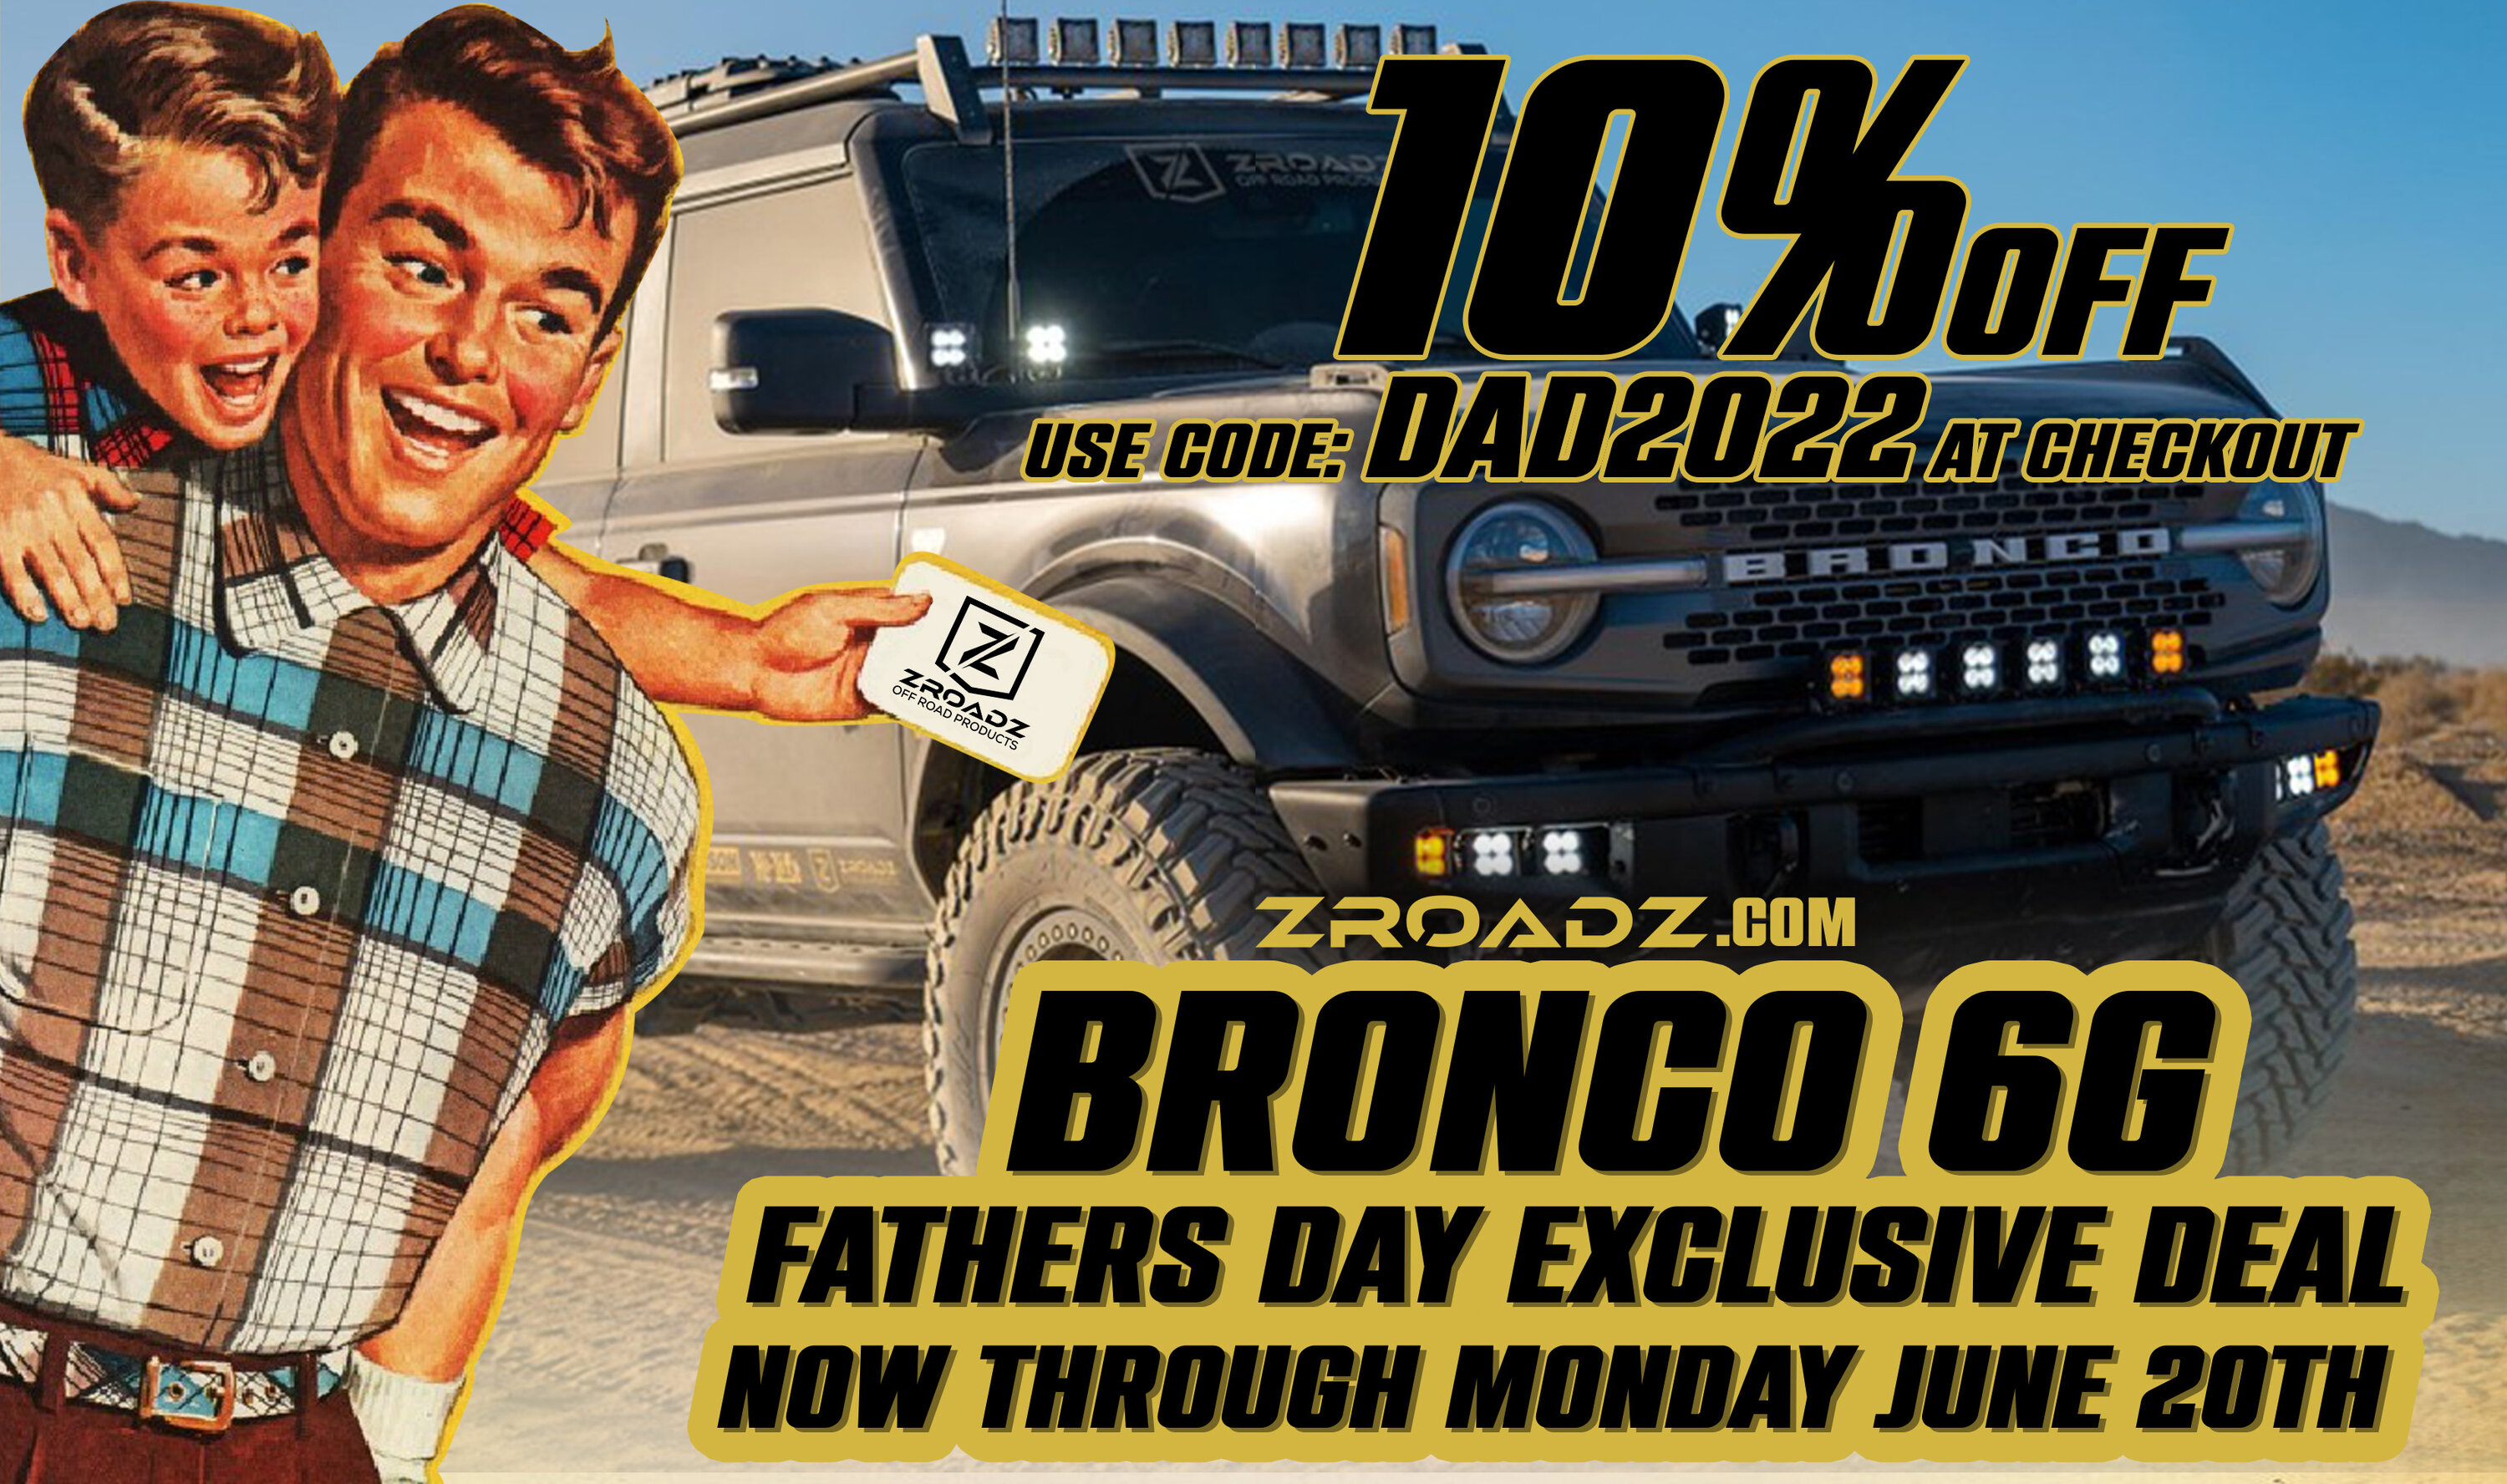 Ford Bronco Fathers Day Exclusive Bronco 6G Offer!!!! fathers day